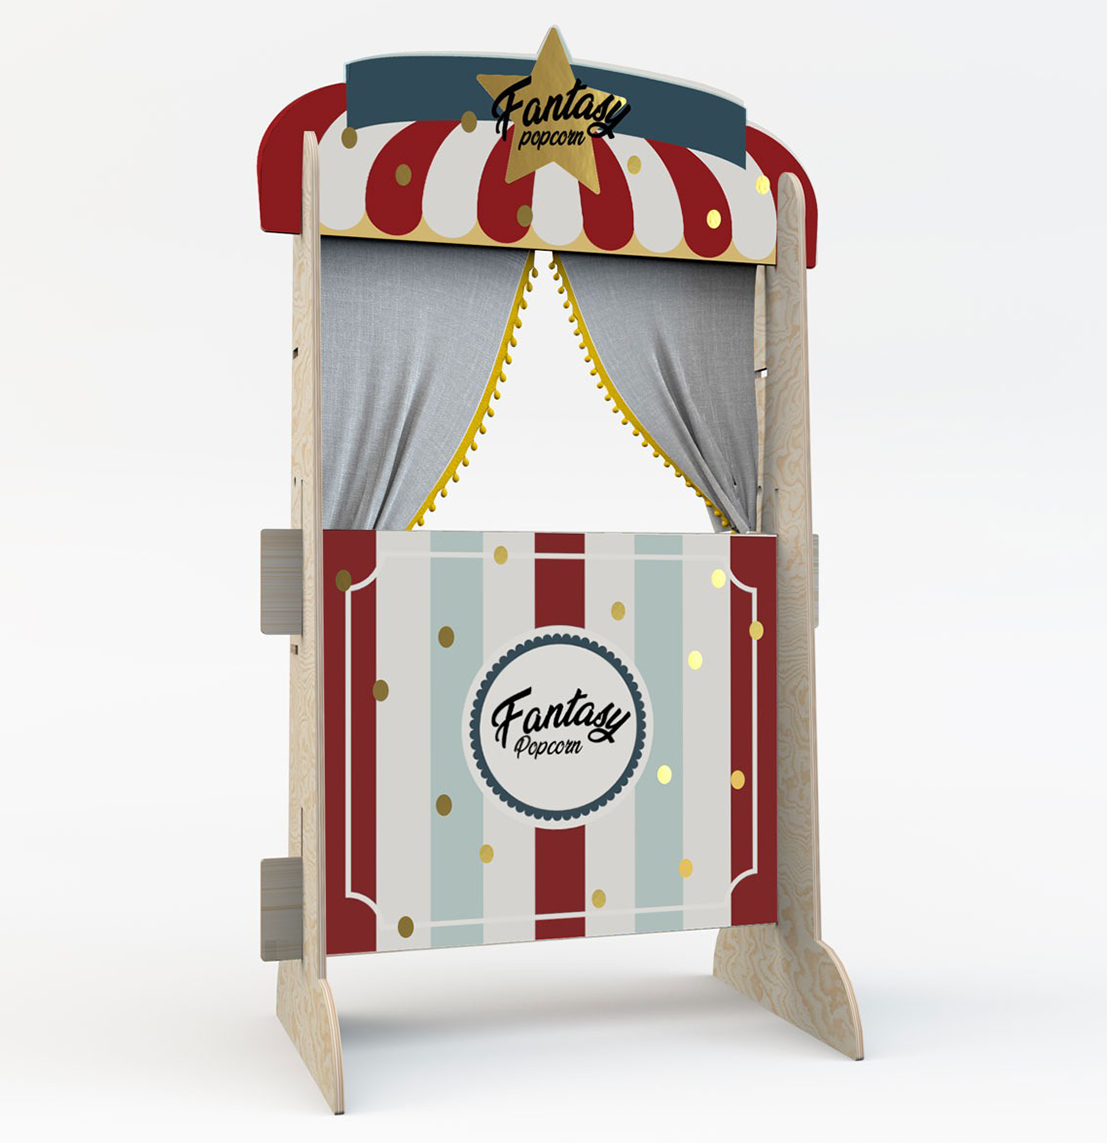 FANTASY Popcorn Shop! Toy And Bookstand In One 135CM